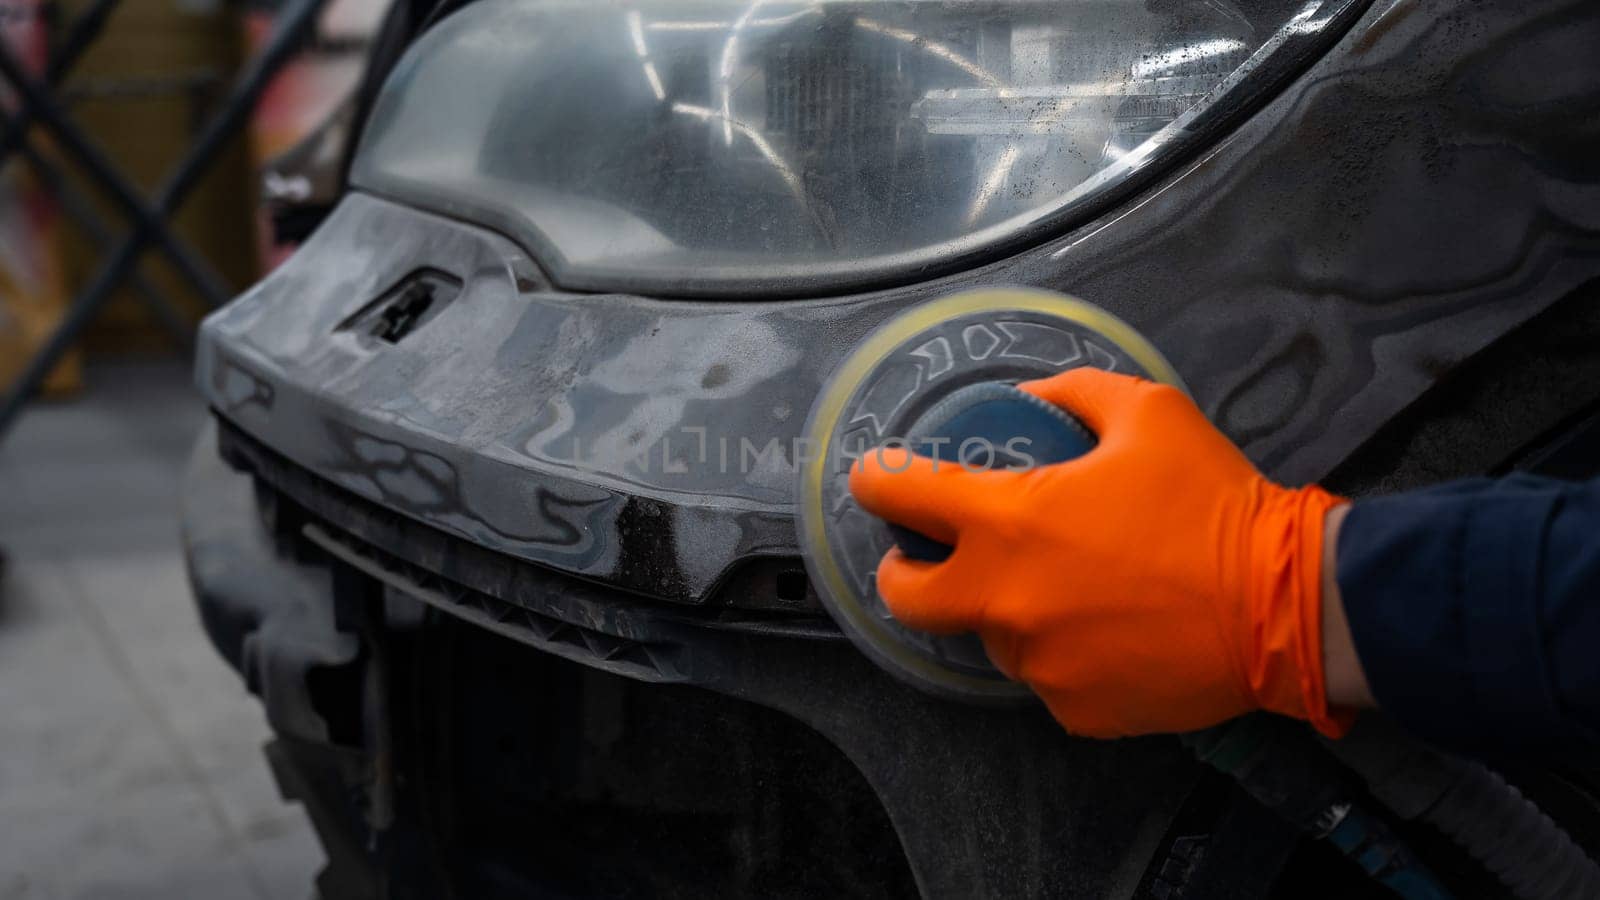 A mechanic sands the putty on a car body with a machine. Repair after an accident